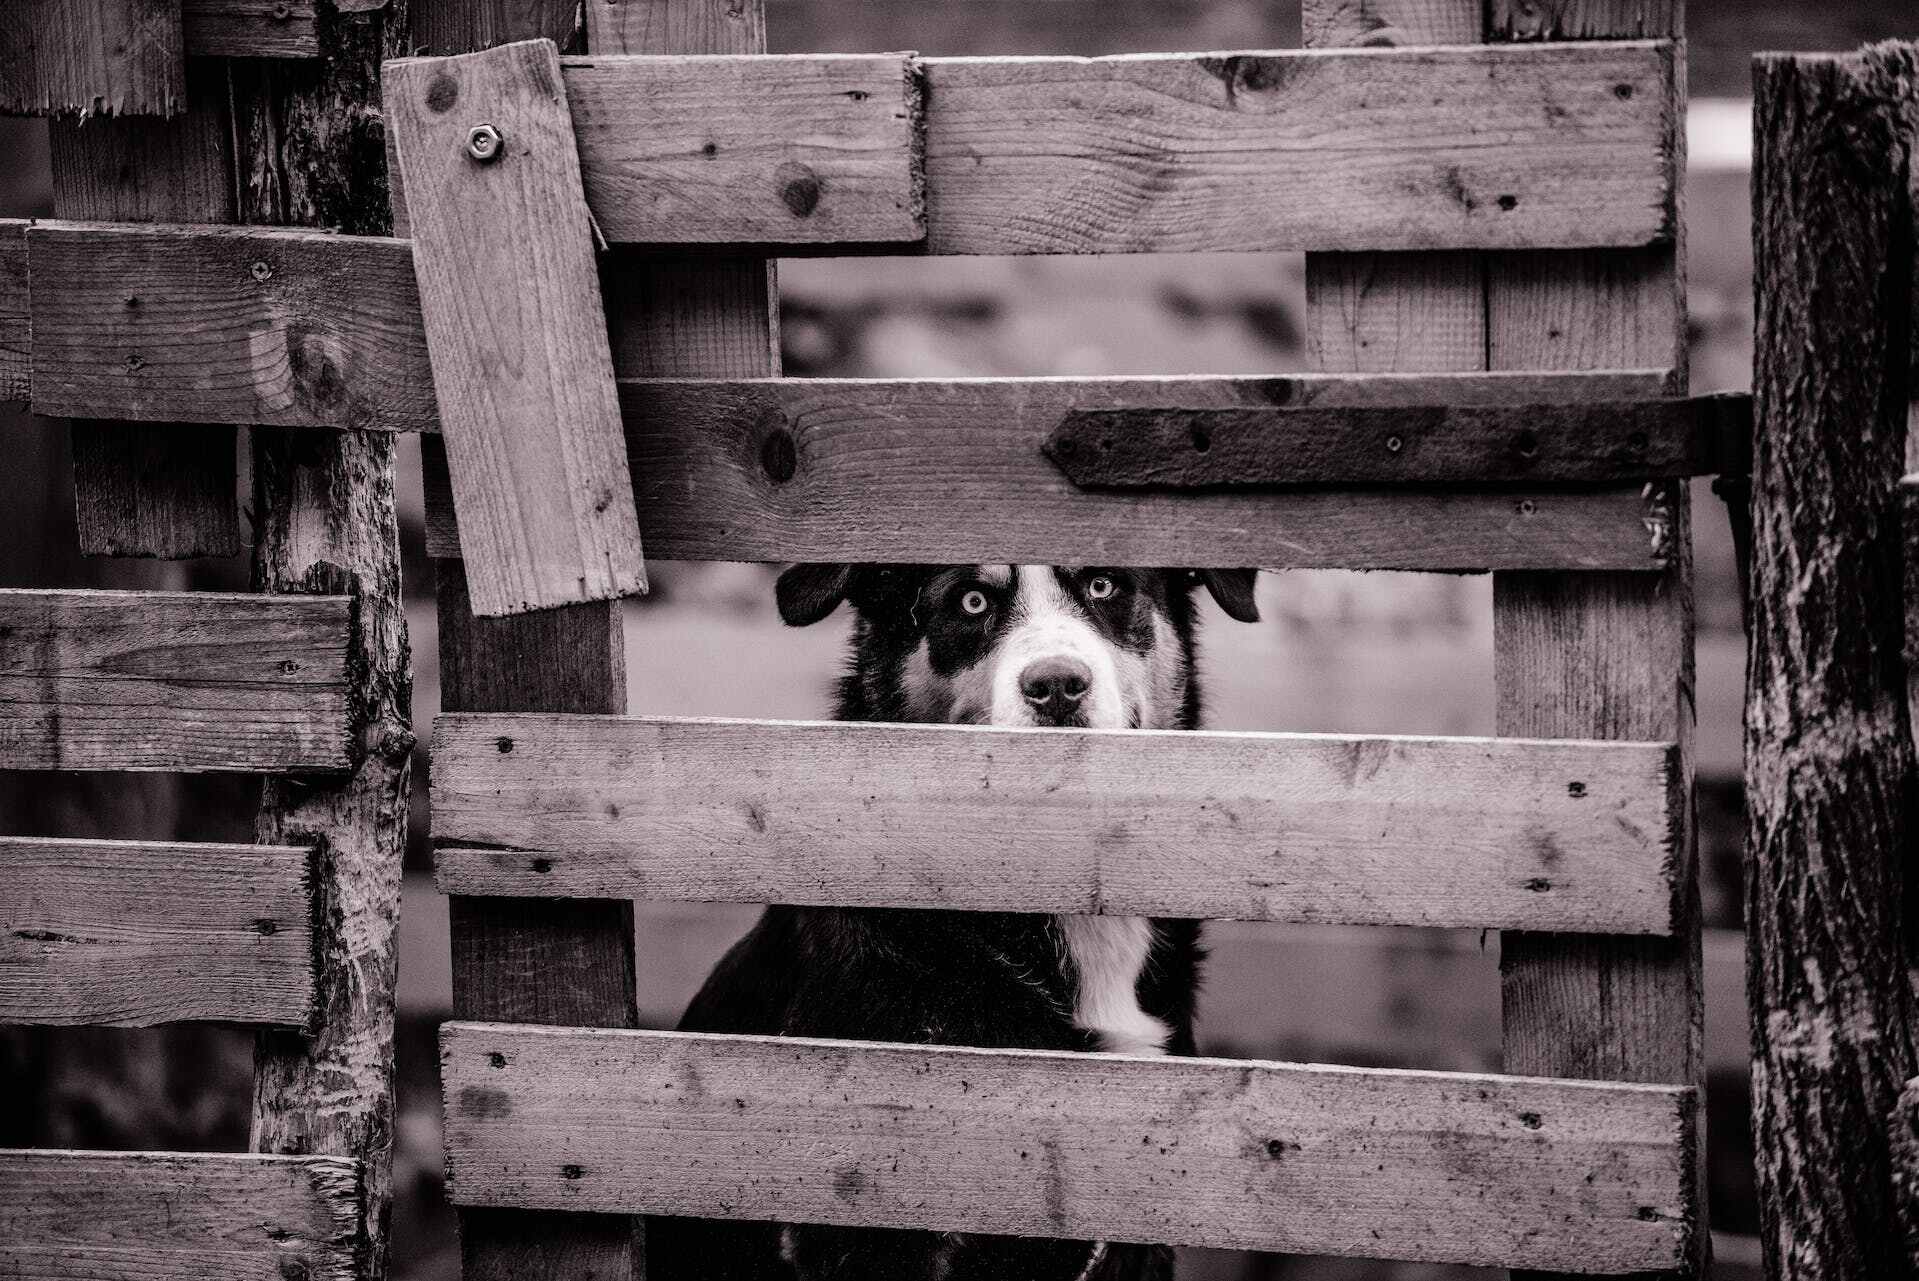 A dog sitting behind a wooden fence